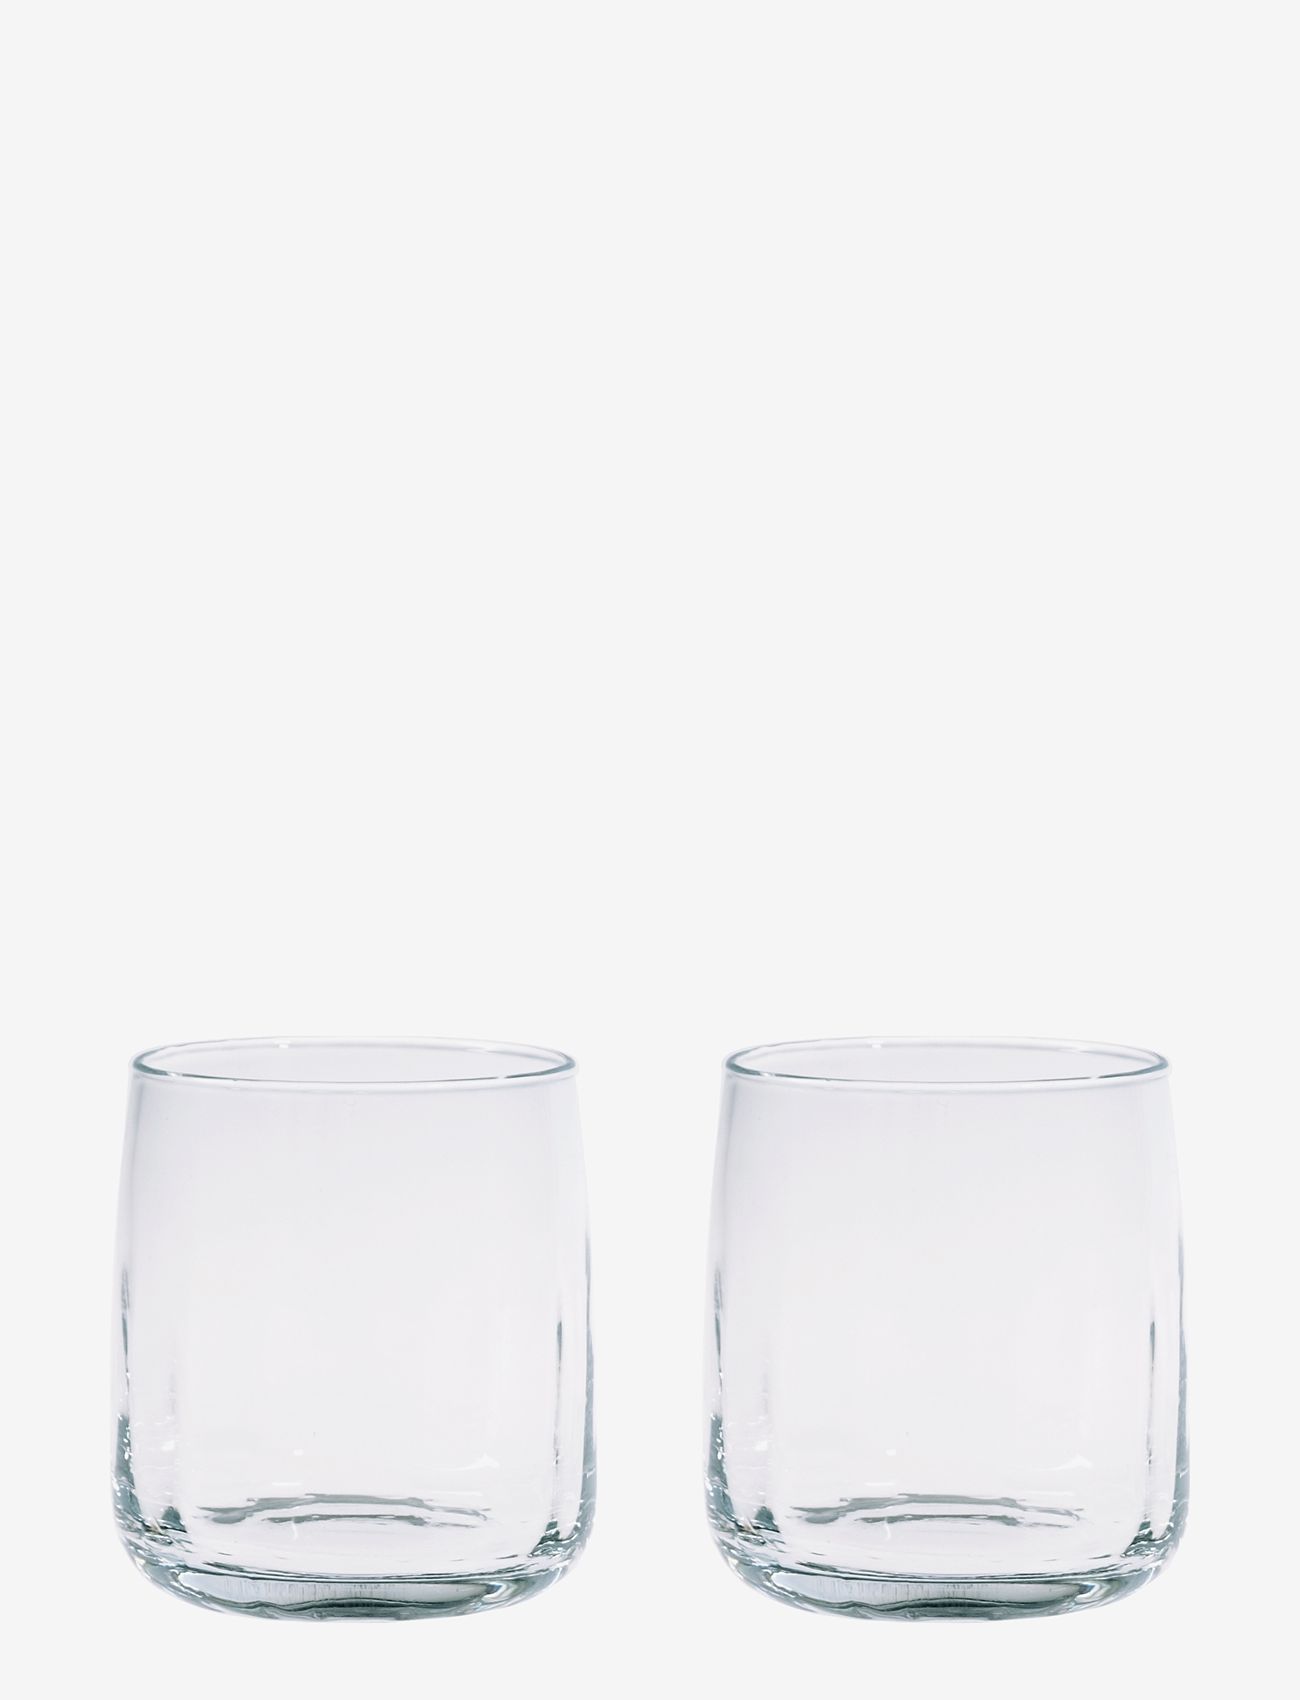 Aida - søholm sonja - waterglass clear 30 cl facet pattern 2 pcs g - mažiausios kainos - clear - 0